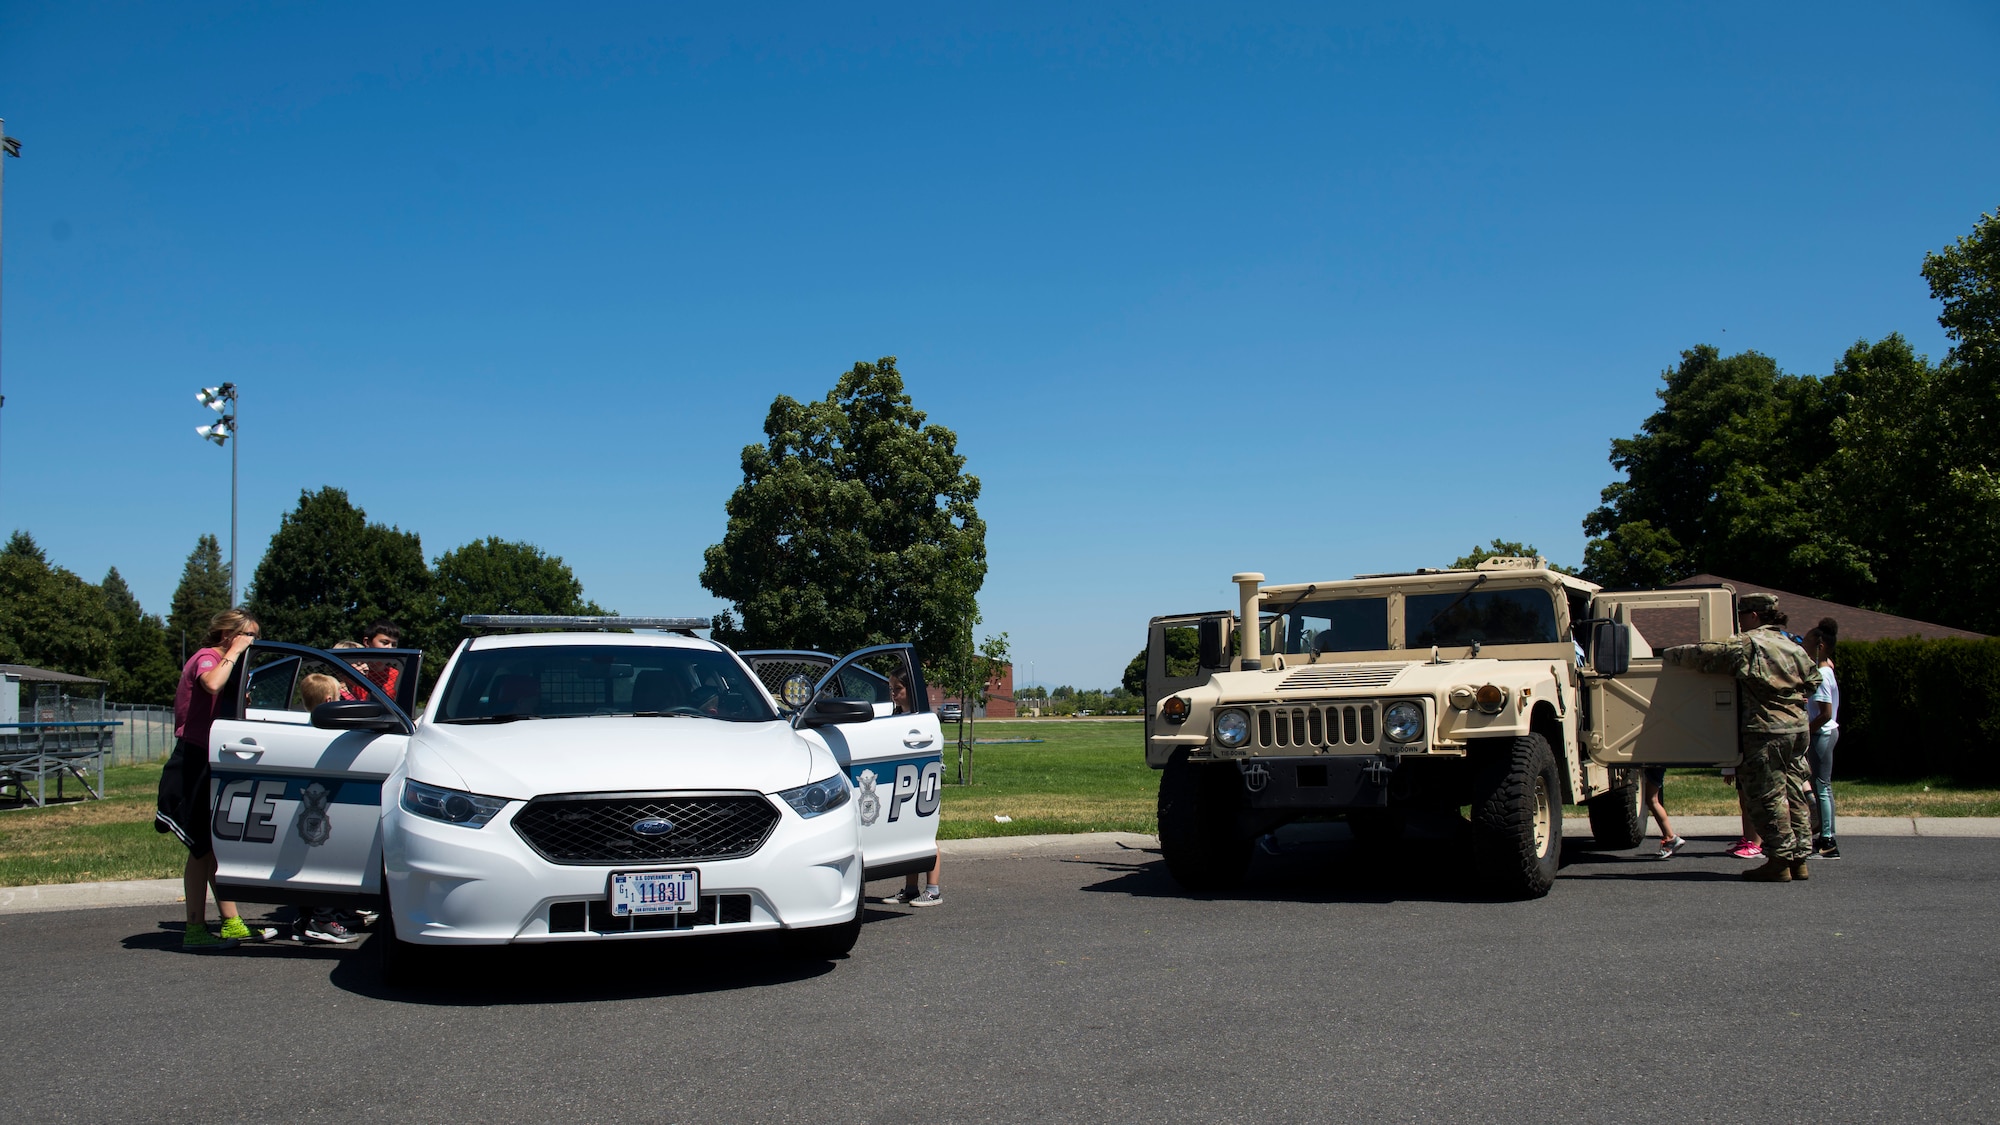 Vehicles from the 92nd Security Forces Squadron are displayed for kids from Fairchild’s Youth Center during the Summer Youth Fair, at Fairchild Air Force Base, Washington, July 25, 2019. Members from Fairchild’s 92nd Civil Engineer Squadron Fire Department, Explosive Ordnance Disposal team, 92nd Security Forces Squadron and 92nd Medical Group provided activities and educational exhibits. (U.S. Air Force photo by Airman 1st Class Lawrence Sena)